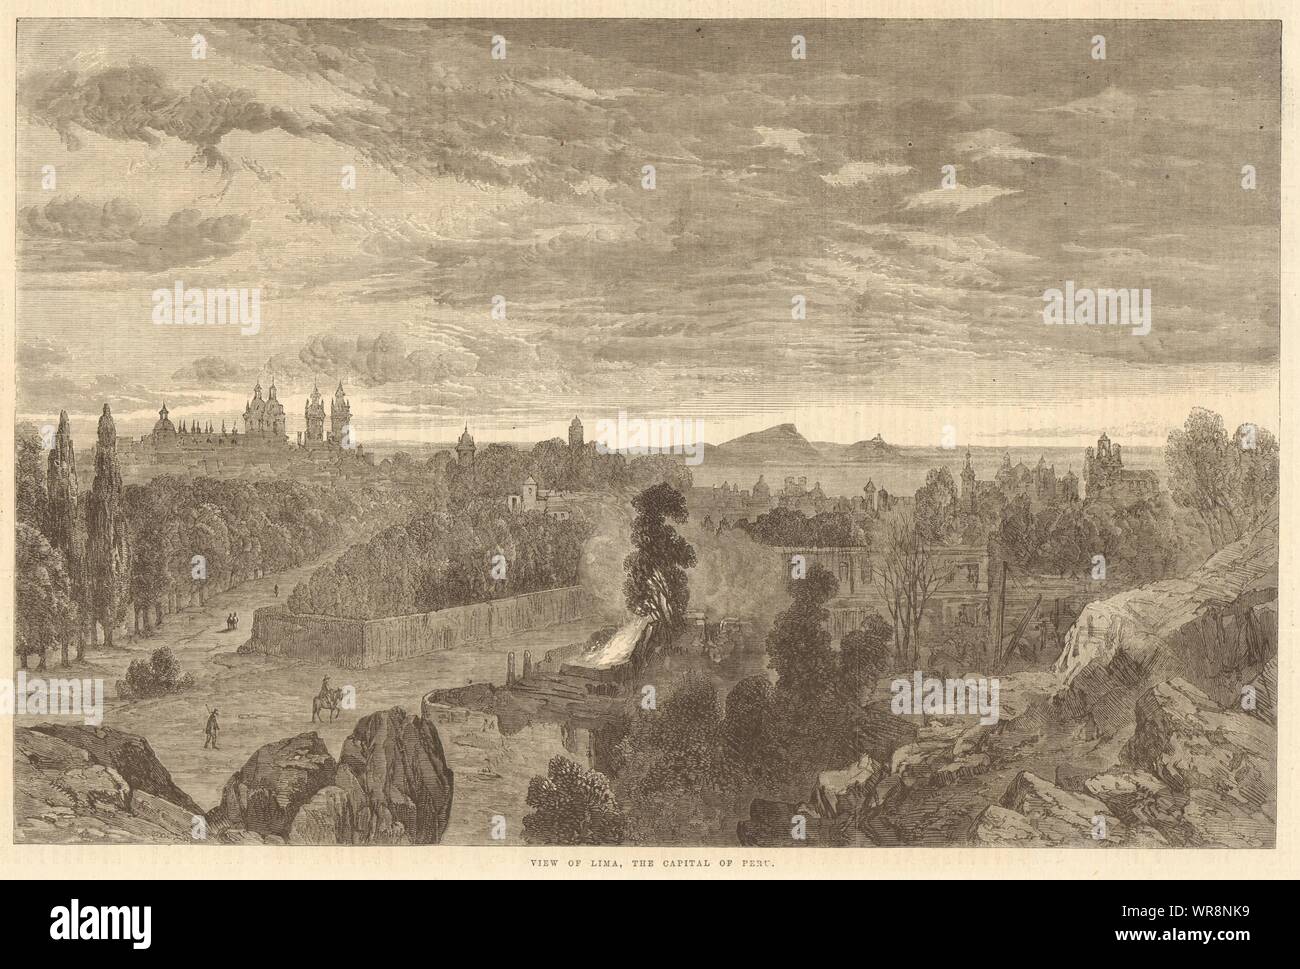 View of Lima, the capital of Peru 1864 antique ILN full page print Stock Photo